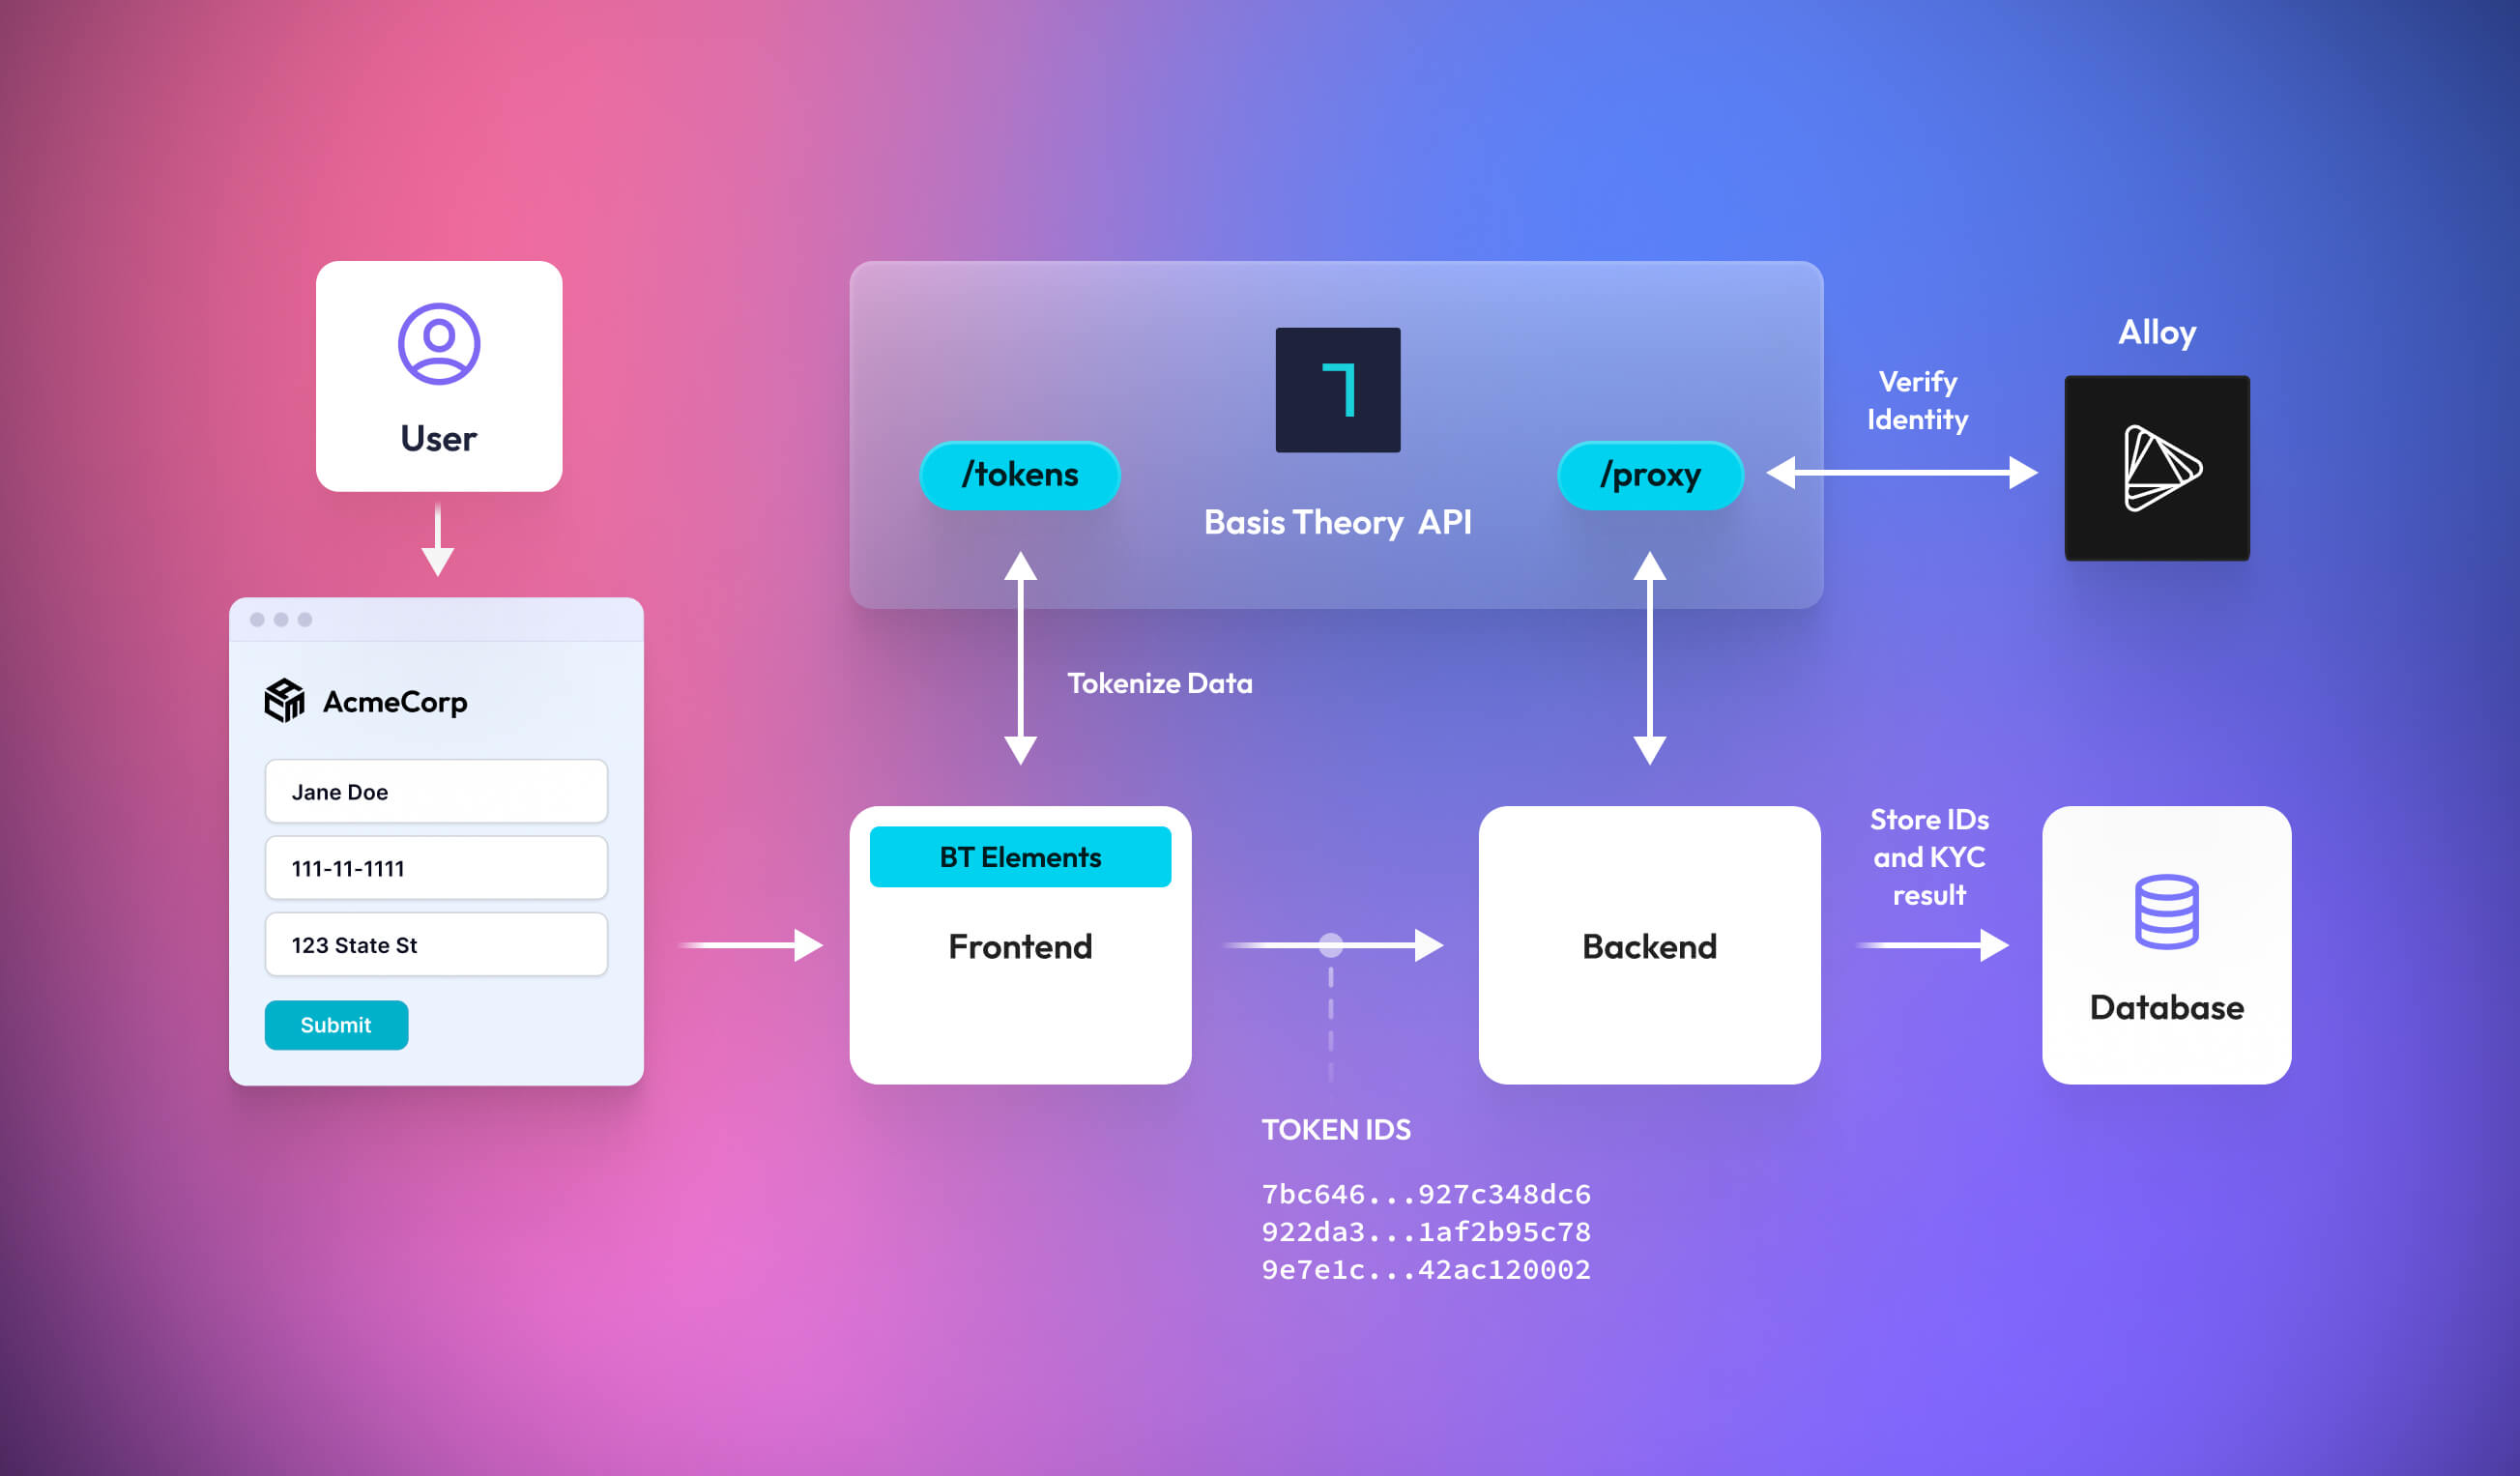 User provided PII flows to Basis Theory where it is tokenized and proxied to your KYC solutions provider.